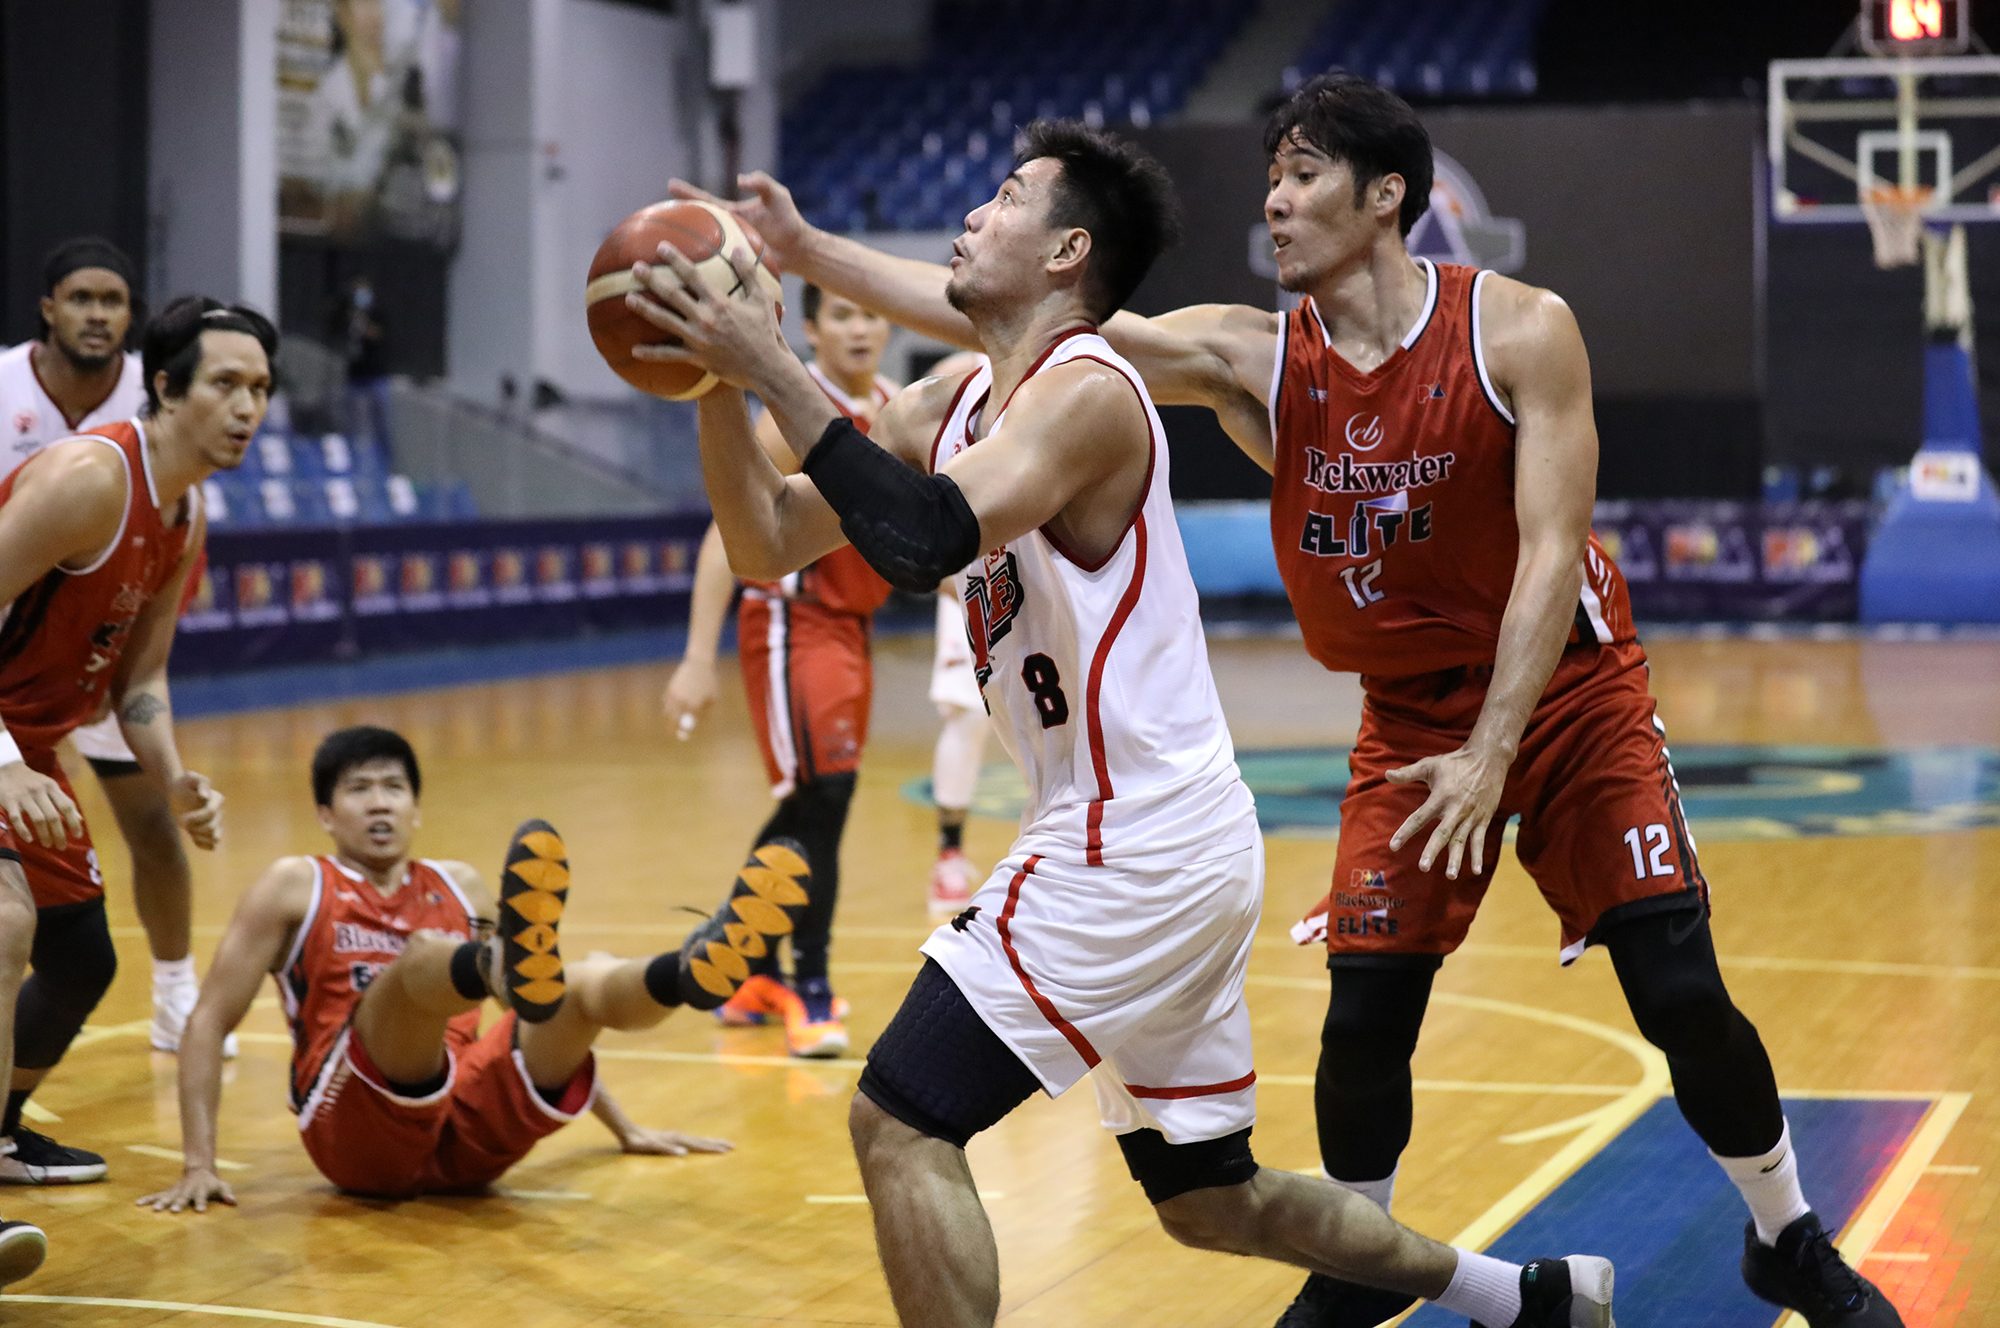 Danny Ildefonso’s mentorship evident in  Eboña’s career game